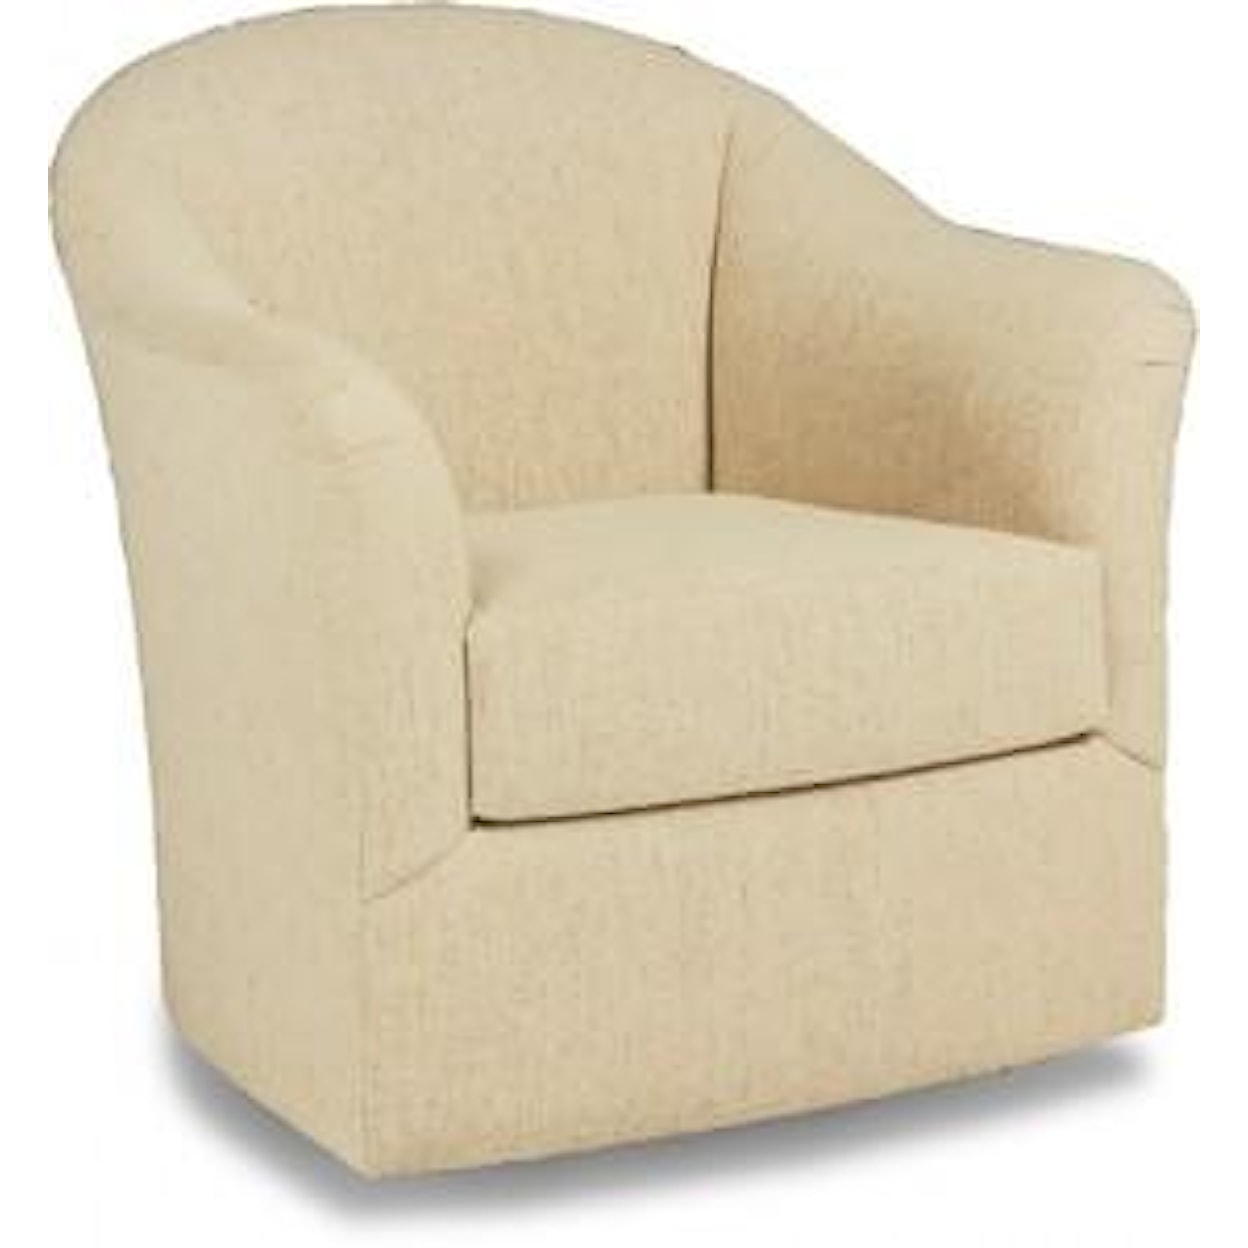 Precedent Accent Chairs Swivel Chair